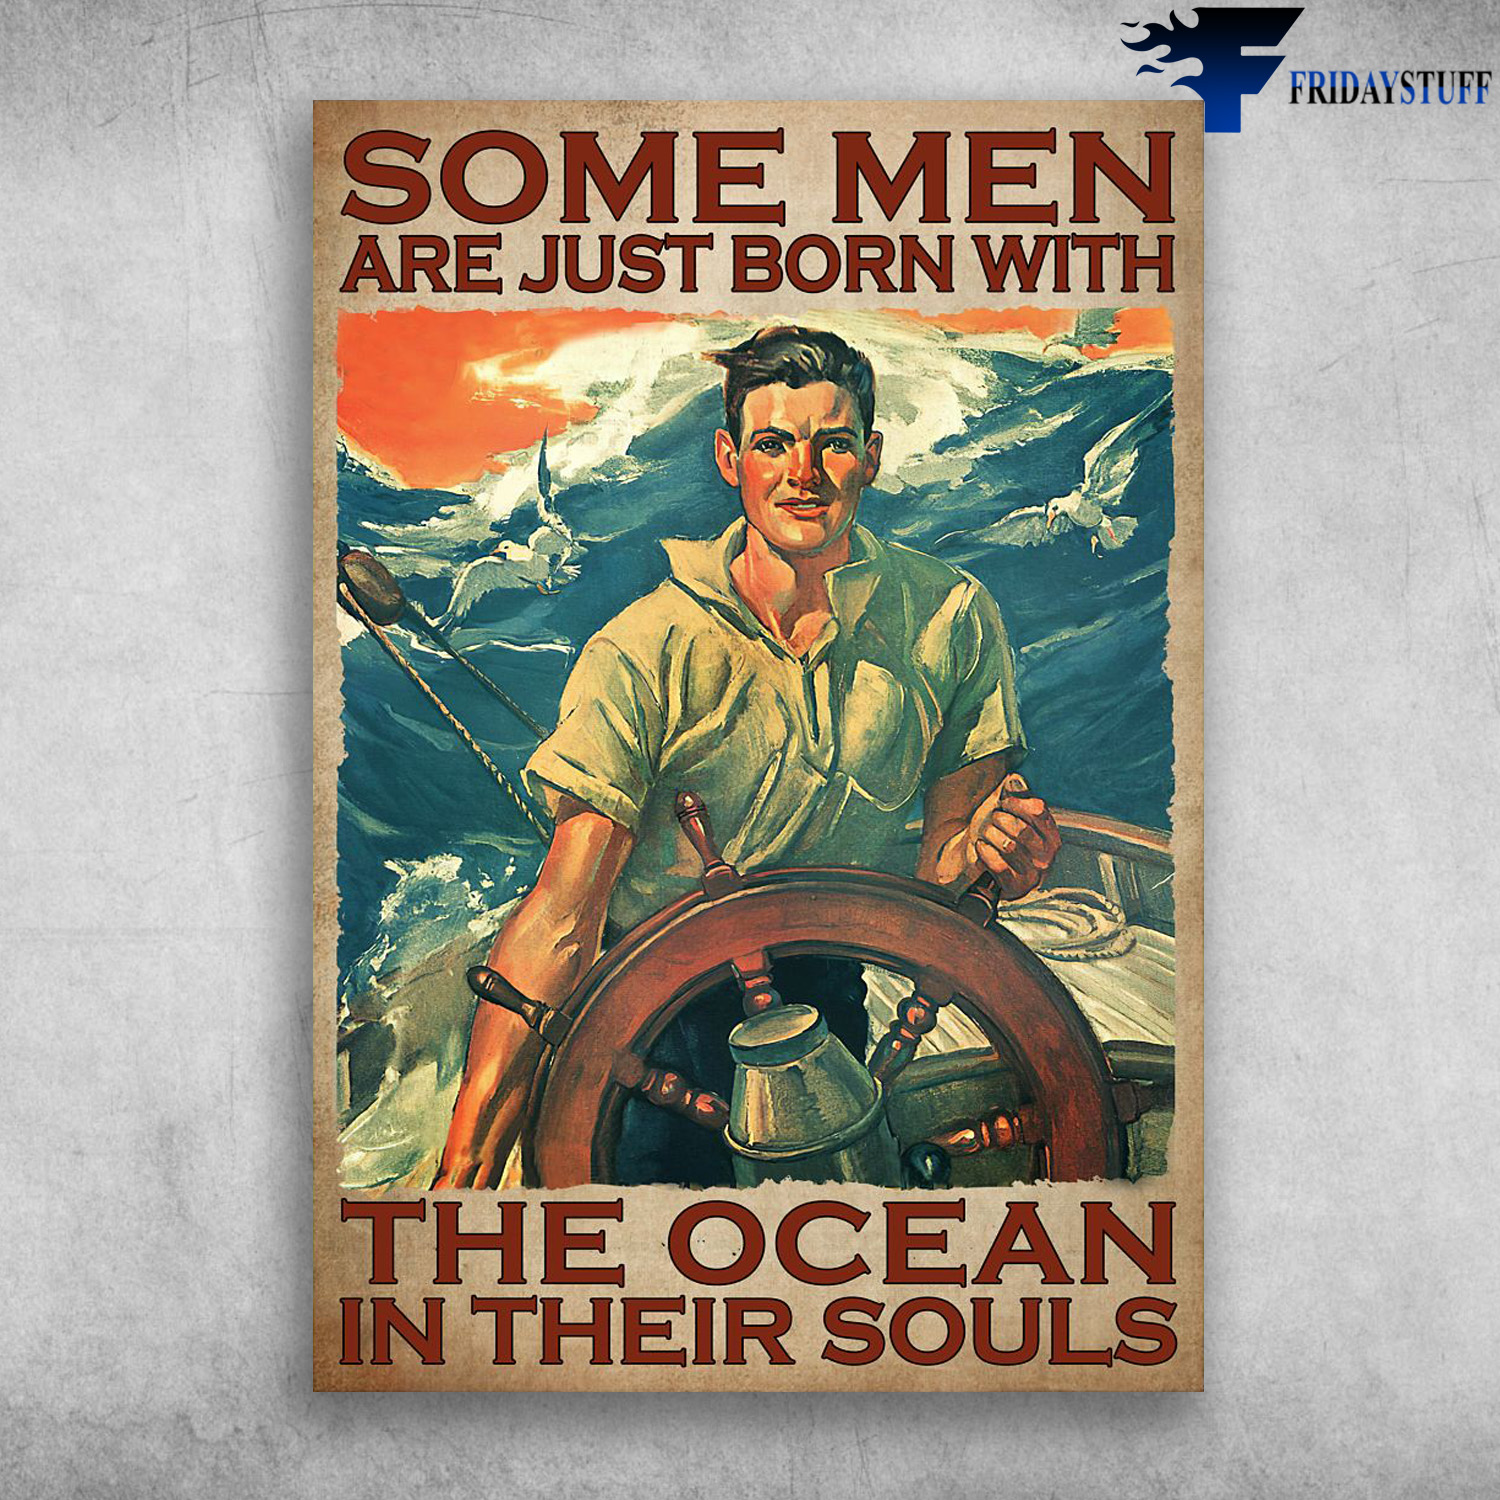 Sailor On The Ocean - Some Men Are Just Born With The Ocean, In Their Souls